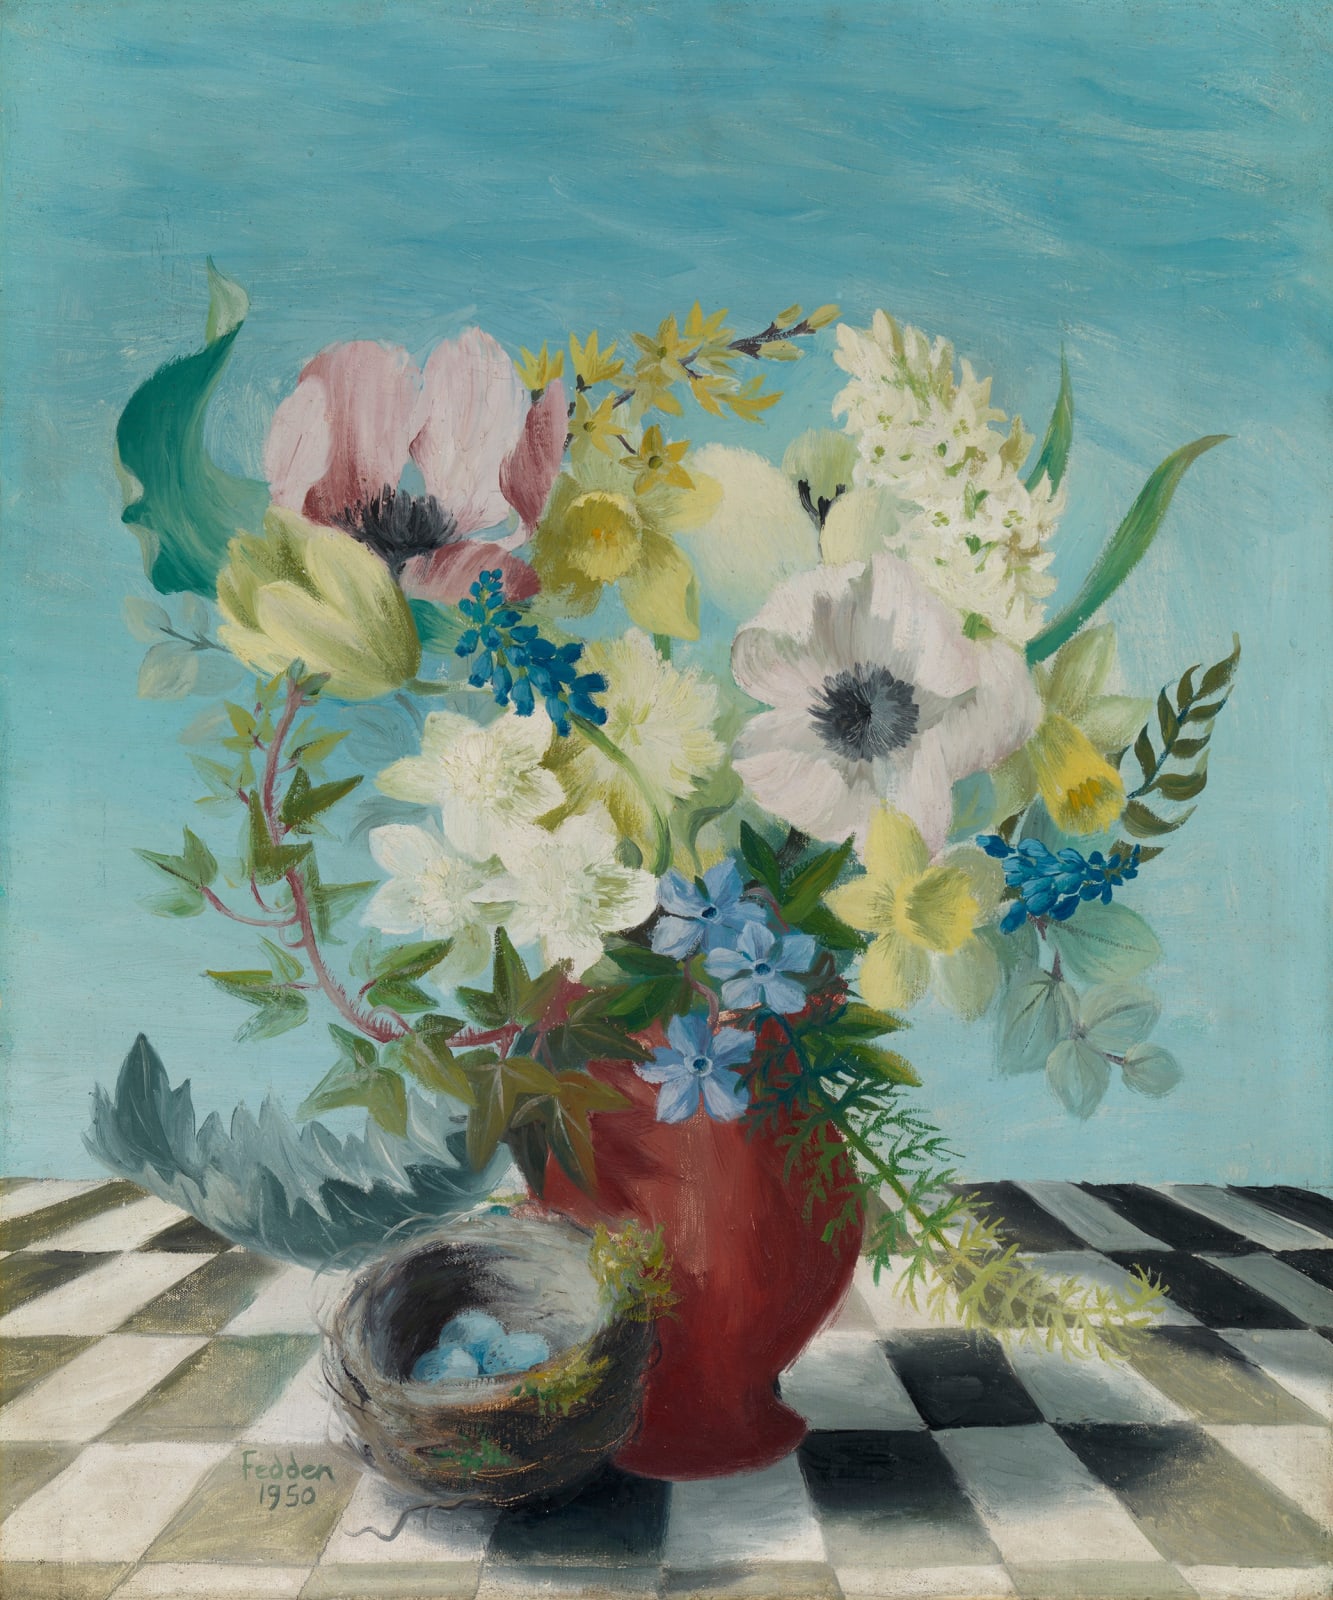 Mary Fedden, Still life with flowers, 1950